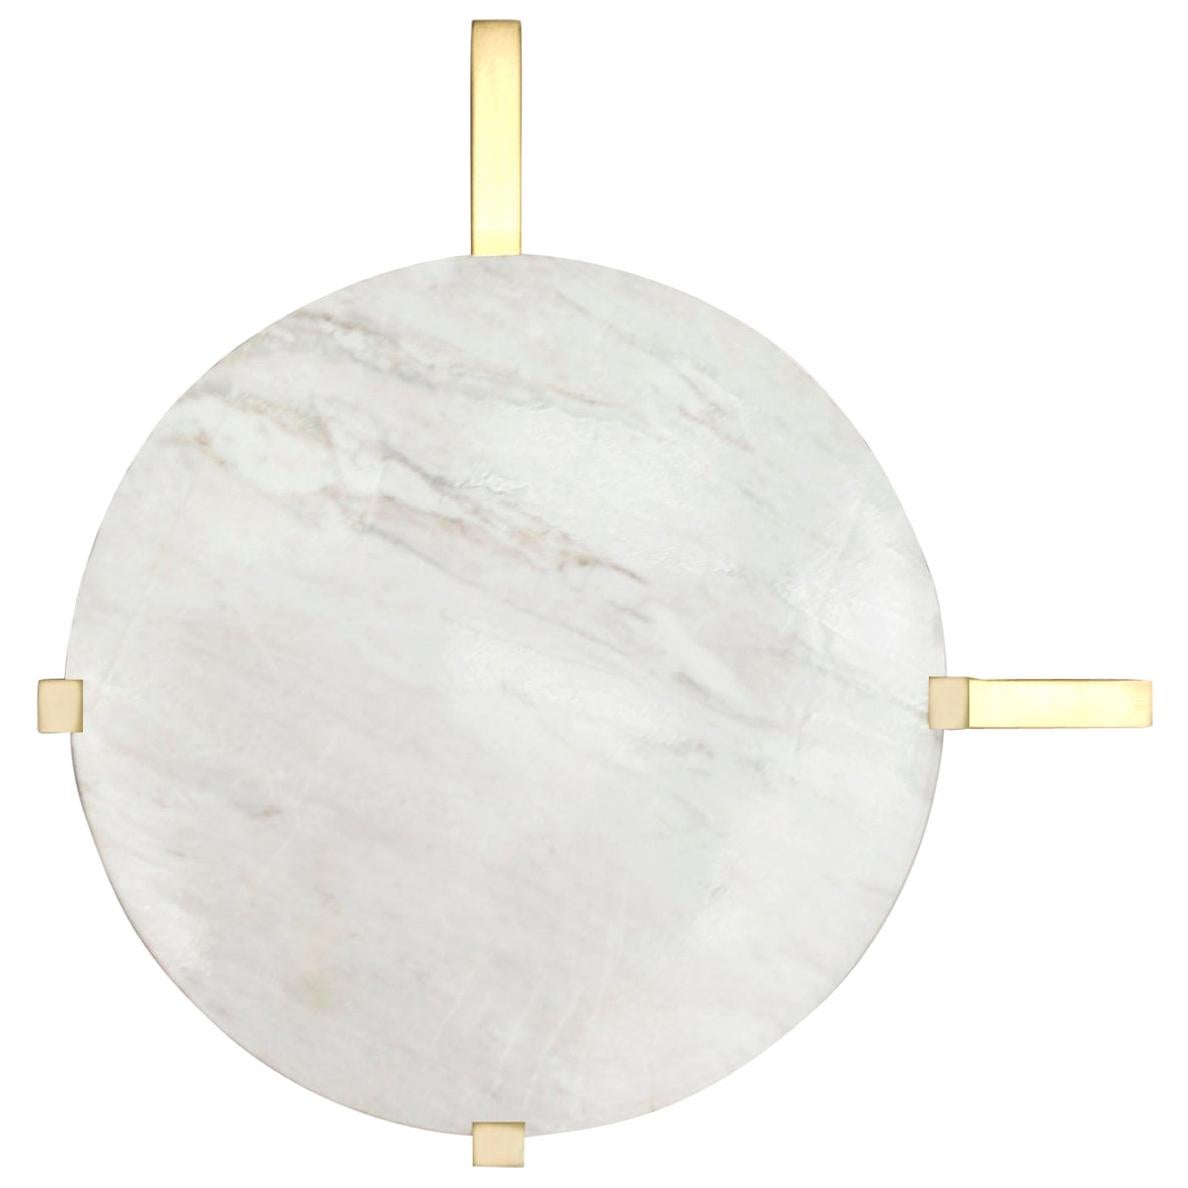 Marble "Disc" Wall Light, Square in Circle